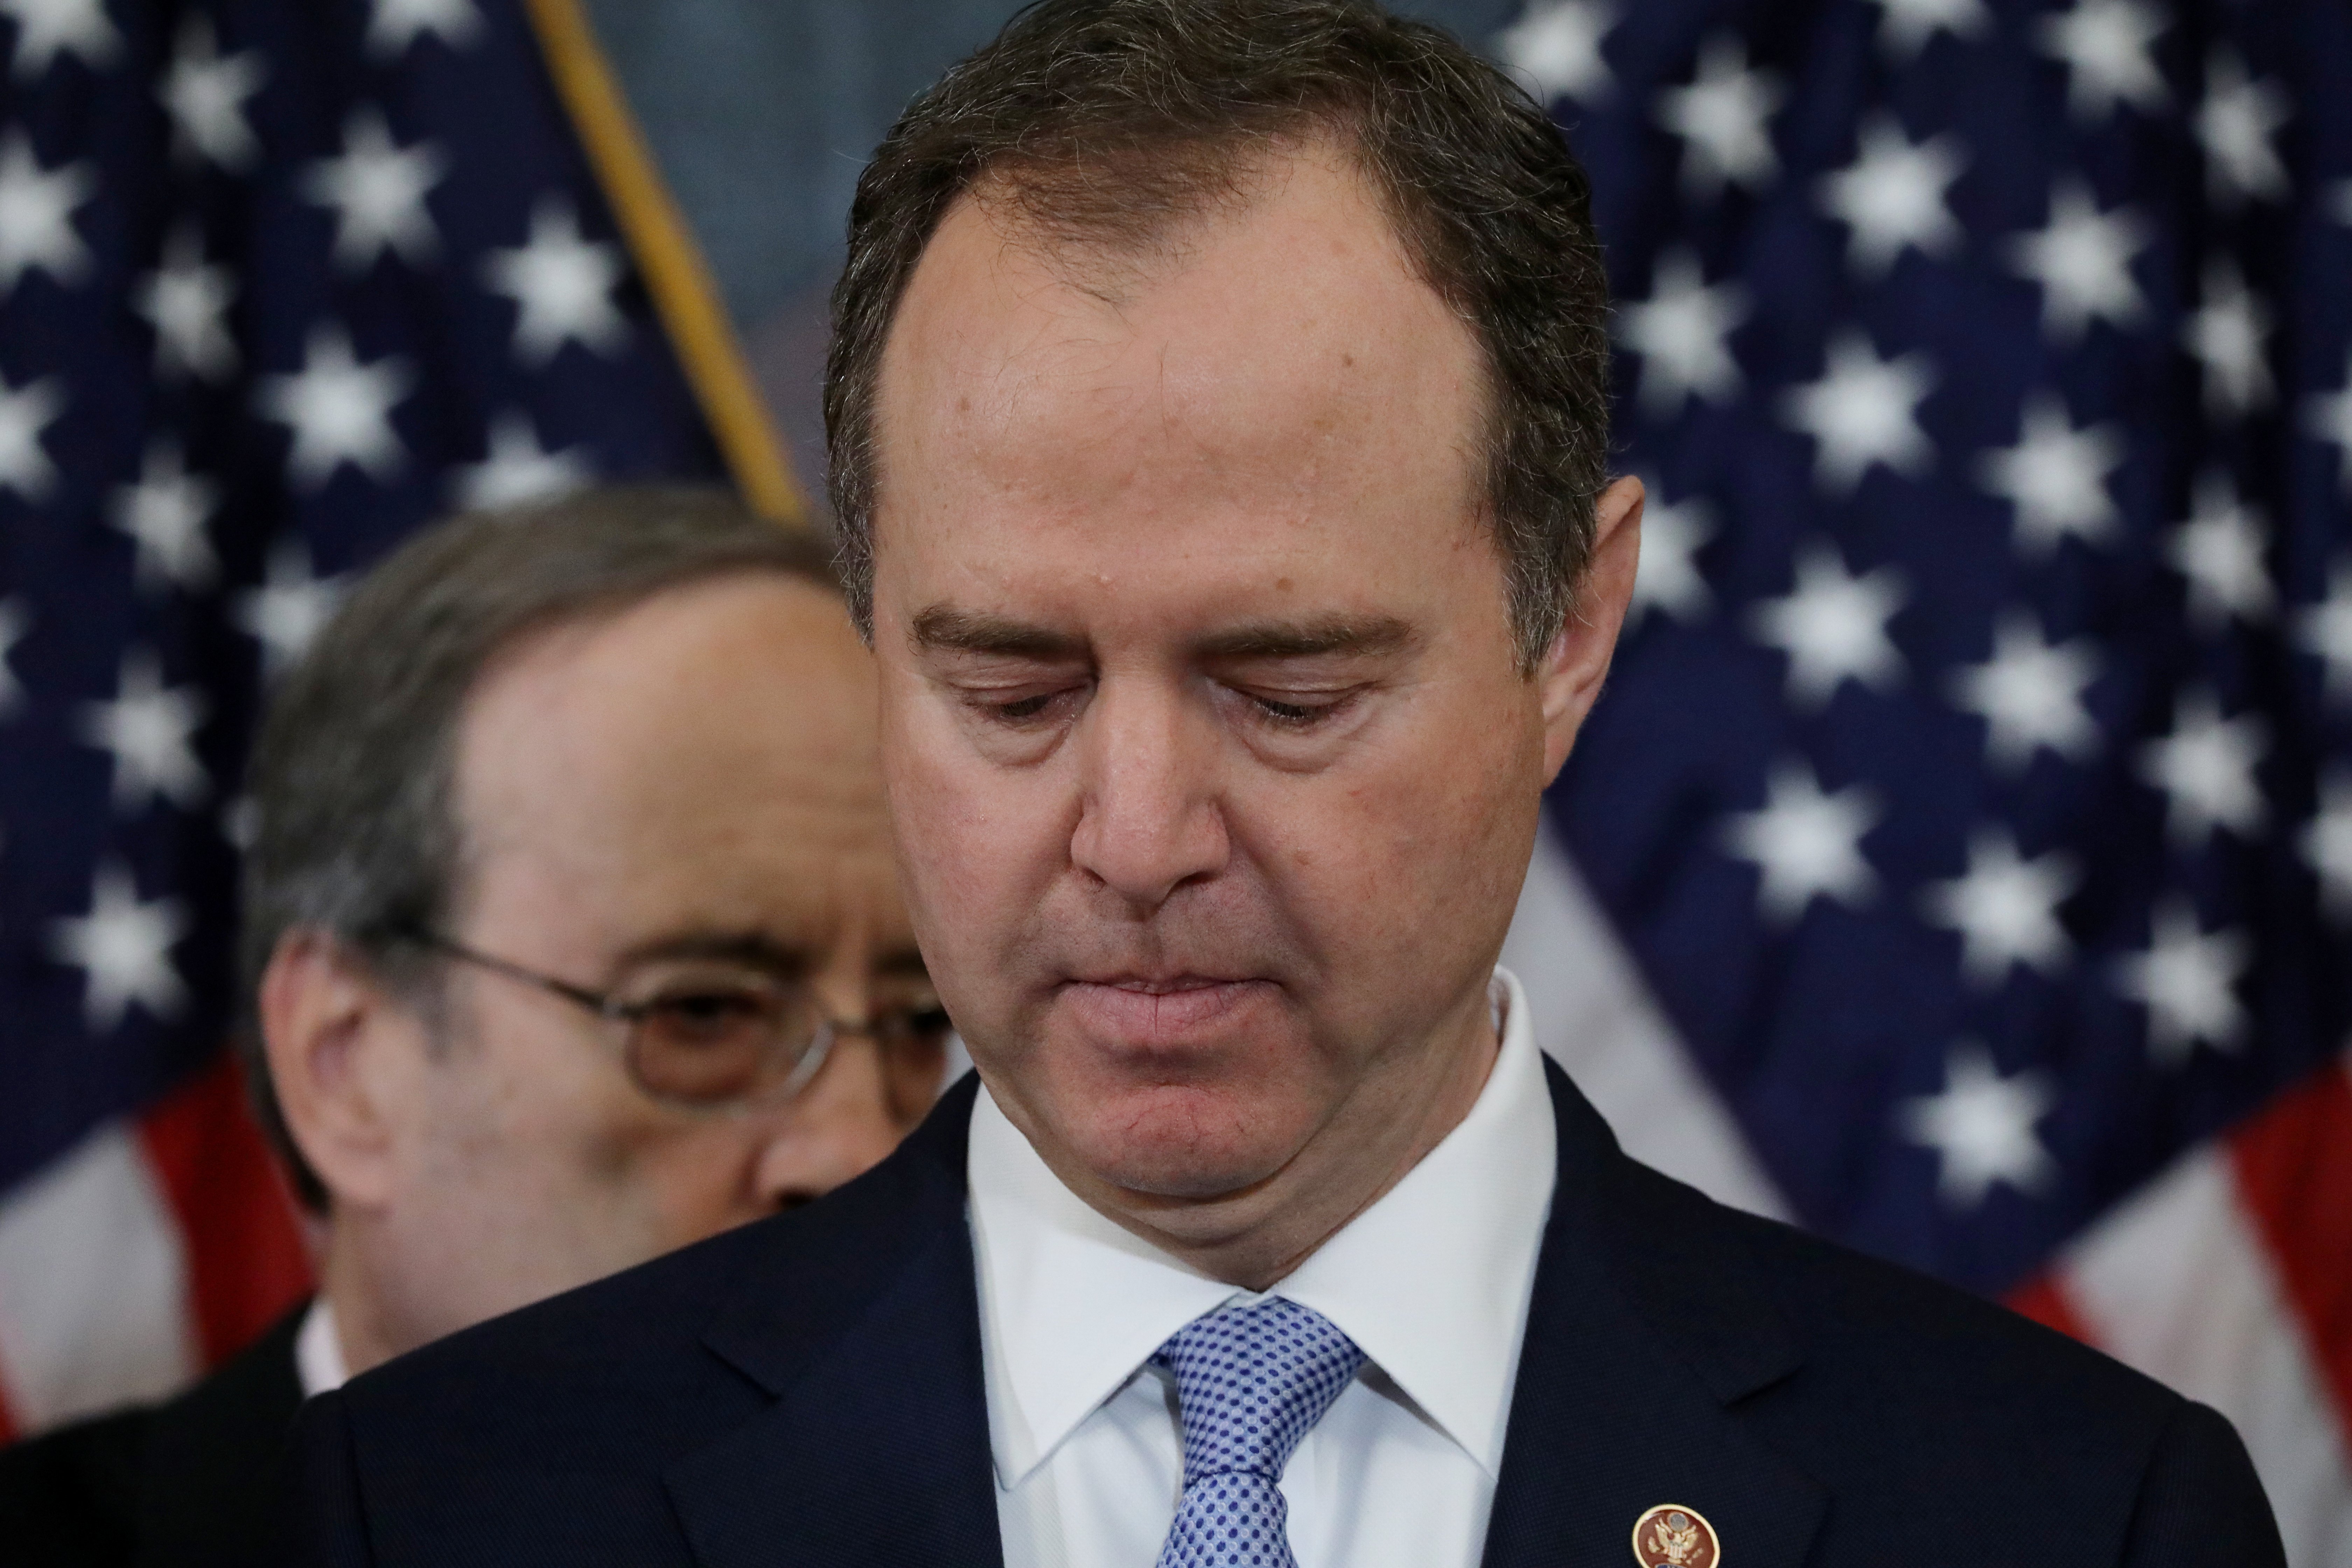 House Intelligence Chairman Adam Schiff (D-CA) pauses while speaking to reporters with House Foreign Affairs Chairman Eliot Engel (D-NY) and other House committee chairs during a news conference to announce articles of impeachment against U.S. President Donald Trump on Capitol Hill in Washington, U.S., December 10, 2019. REUTERS/Jonathan Ernst - RC2FSD997EAS